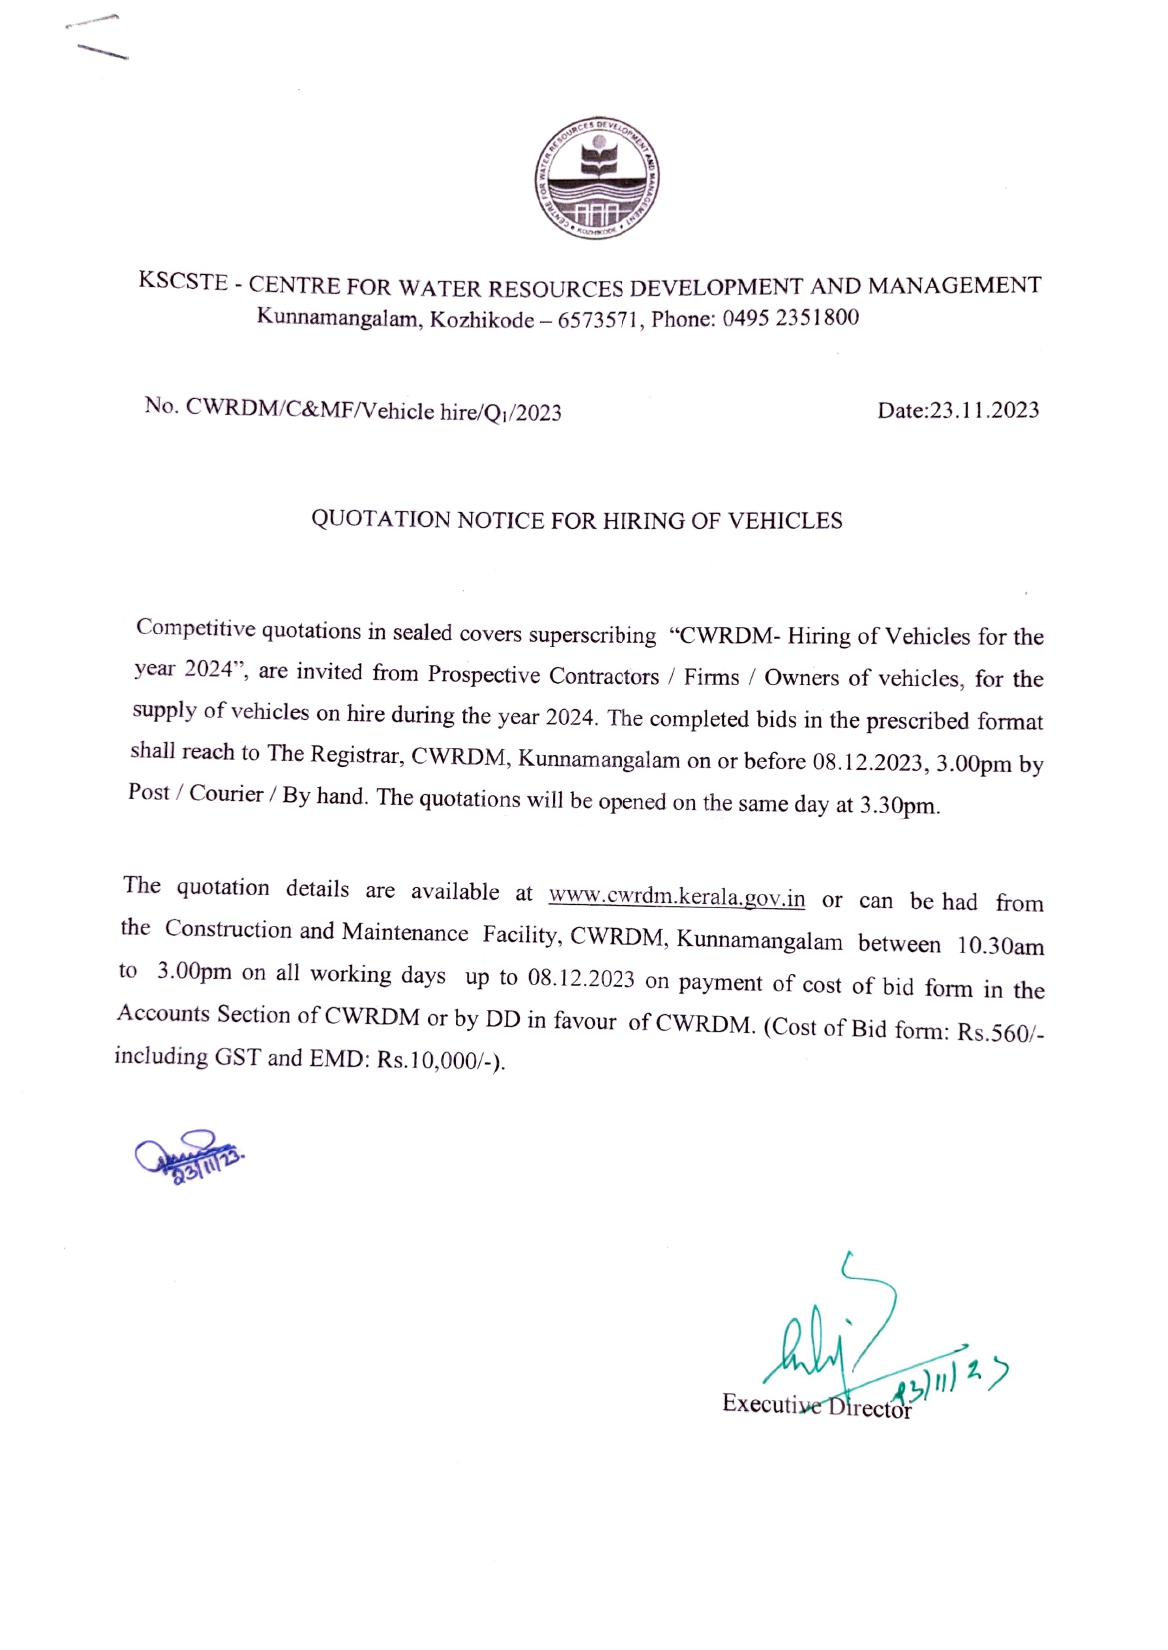 Quotation Notice for hiring of vehicles